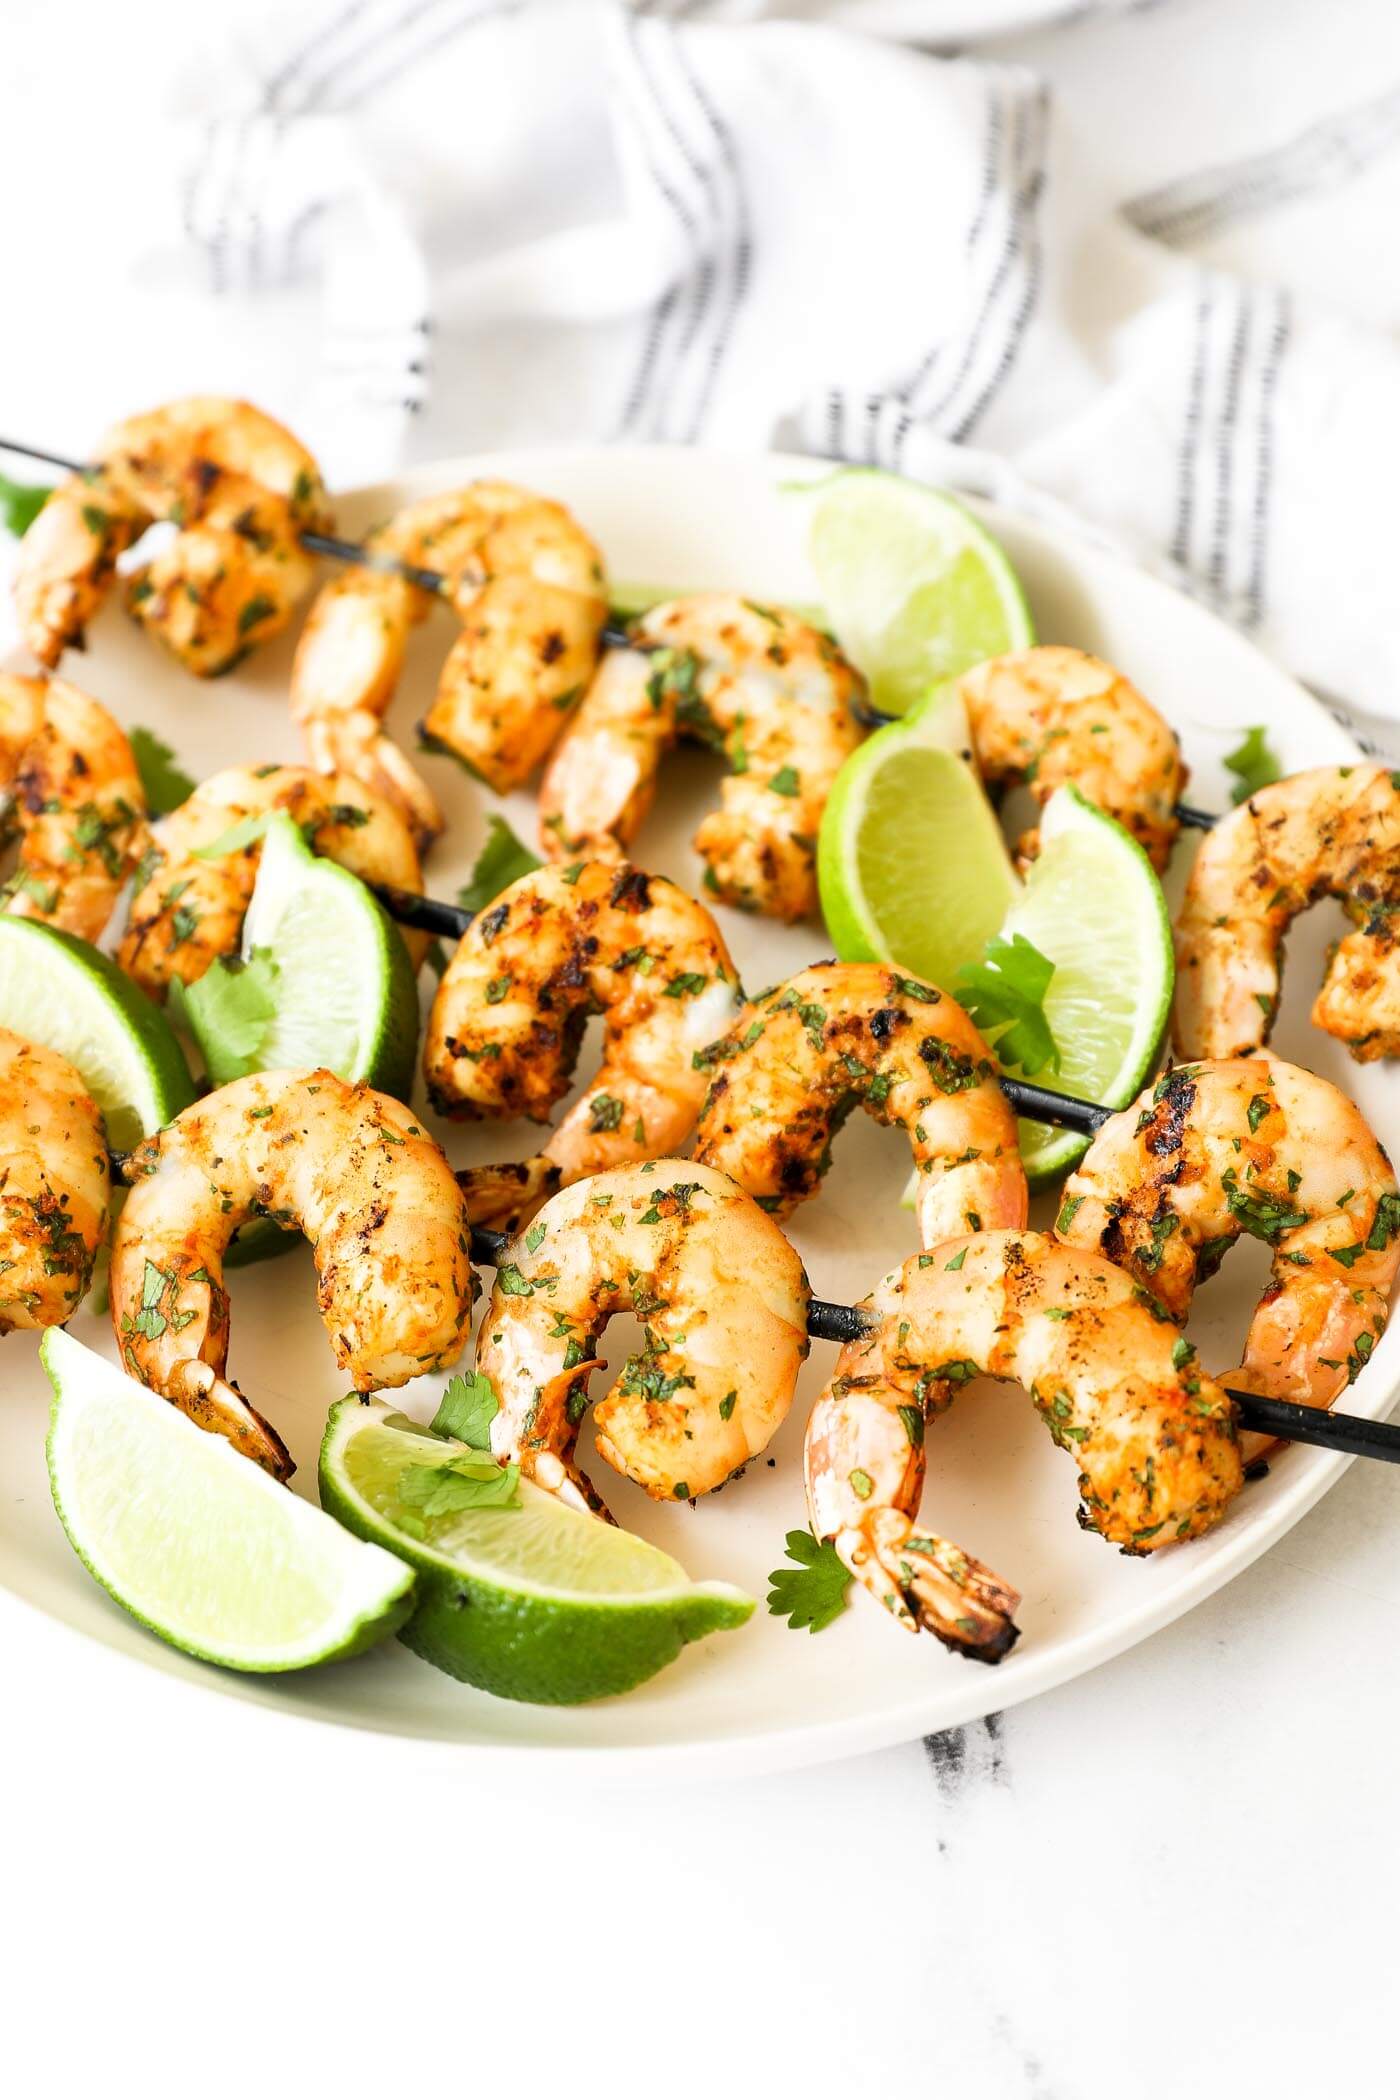 Angled image of skewers on a plate. Grilled shrimp kabobs with